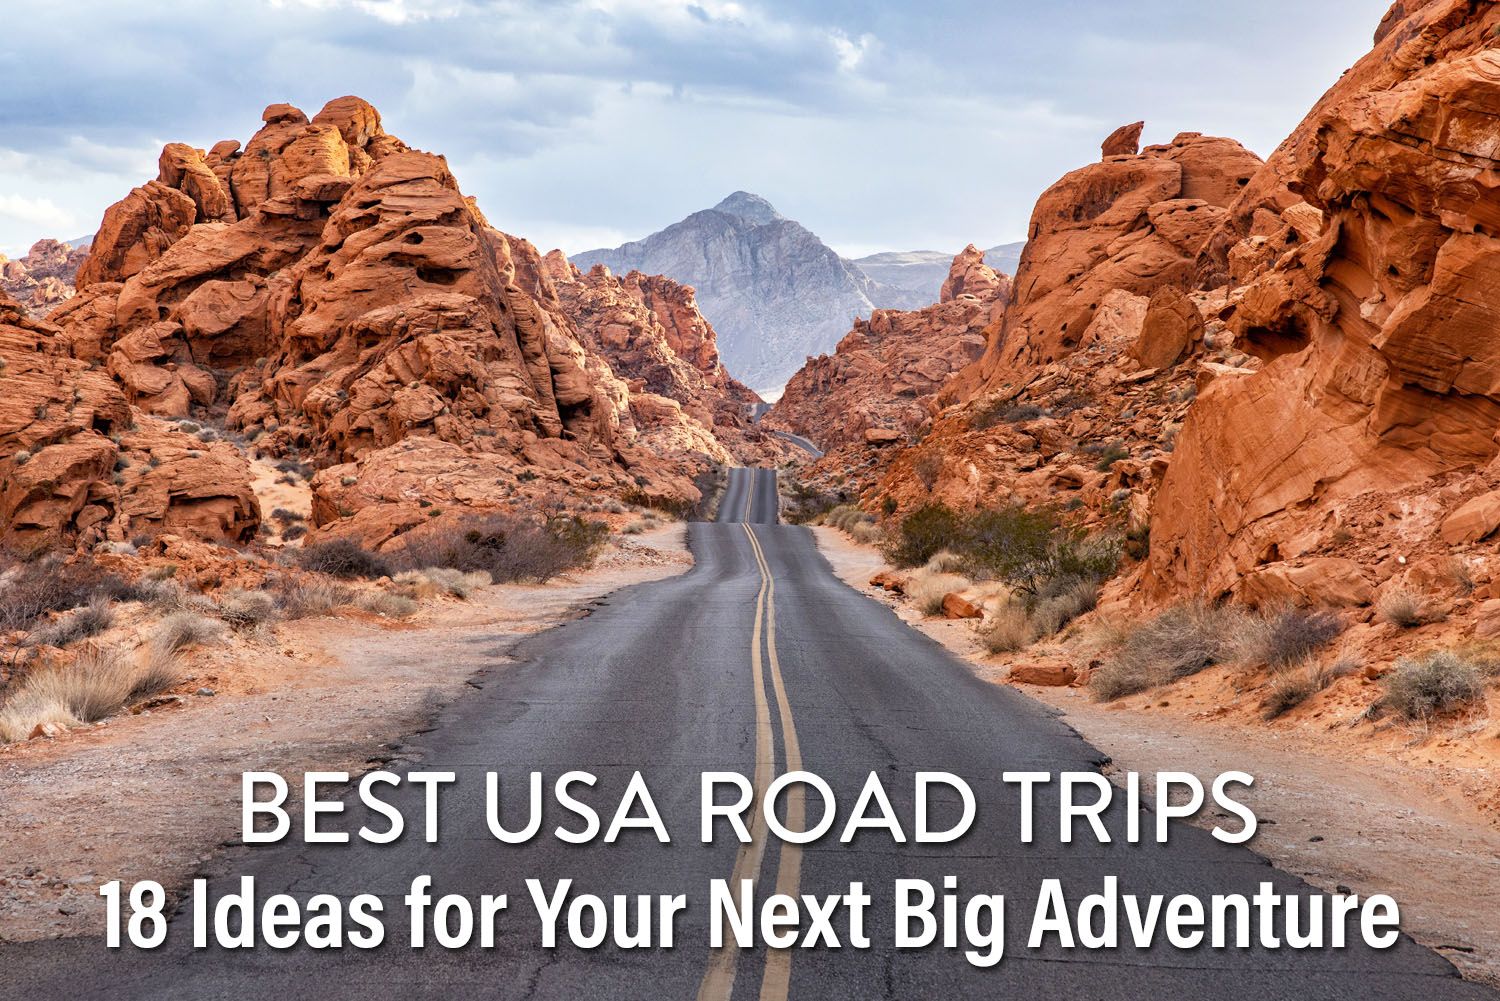 Best USA Road Trips